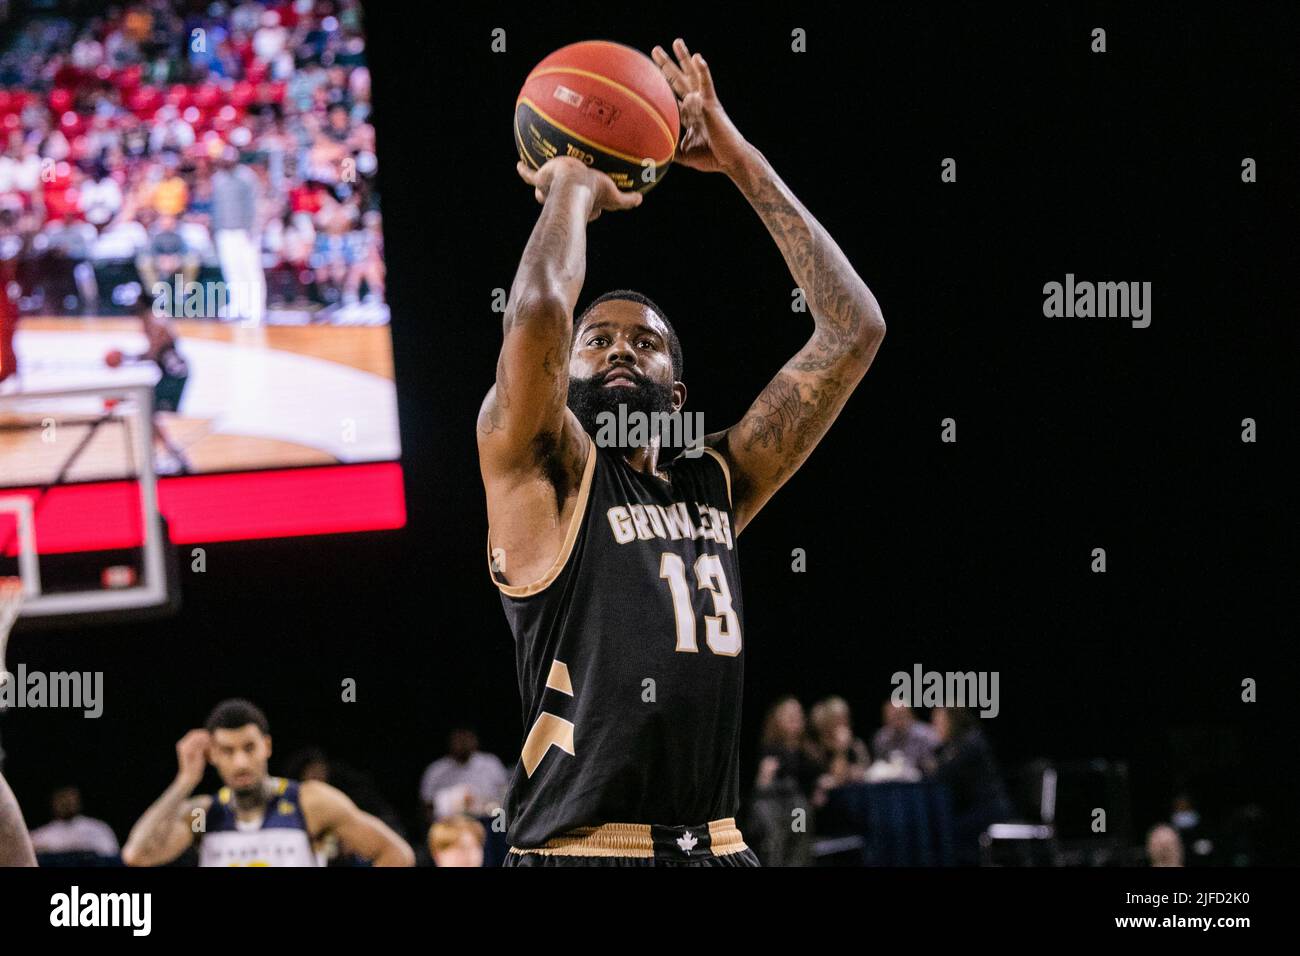 Newfoundland's #13 Terry Thomas (Guard) seen in action during the Edmonton Stingers rout of the Newfoundland Growlers in Canadian Elite Basketball Action with a historic victory. Edmonton Stingers 120-69  Fraser Valley Bandits. Stock Photo